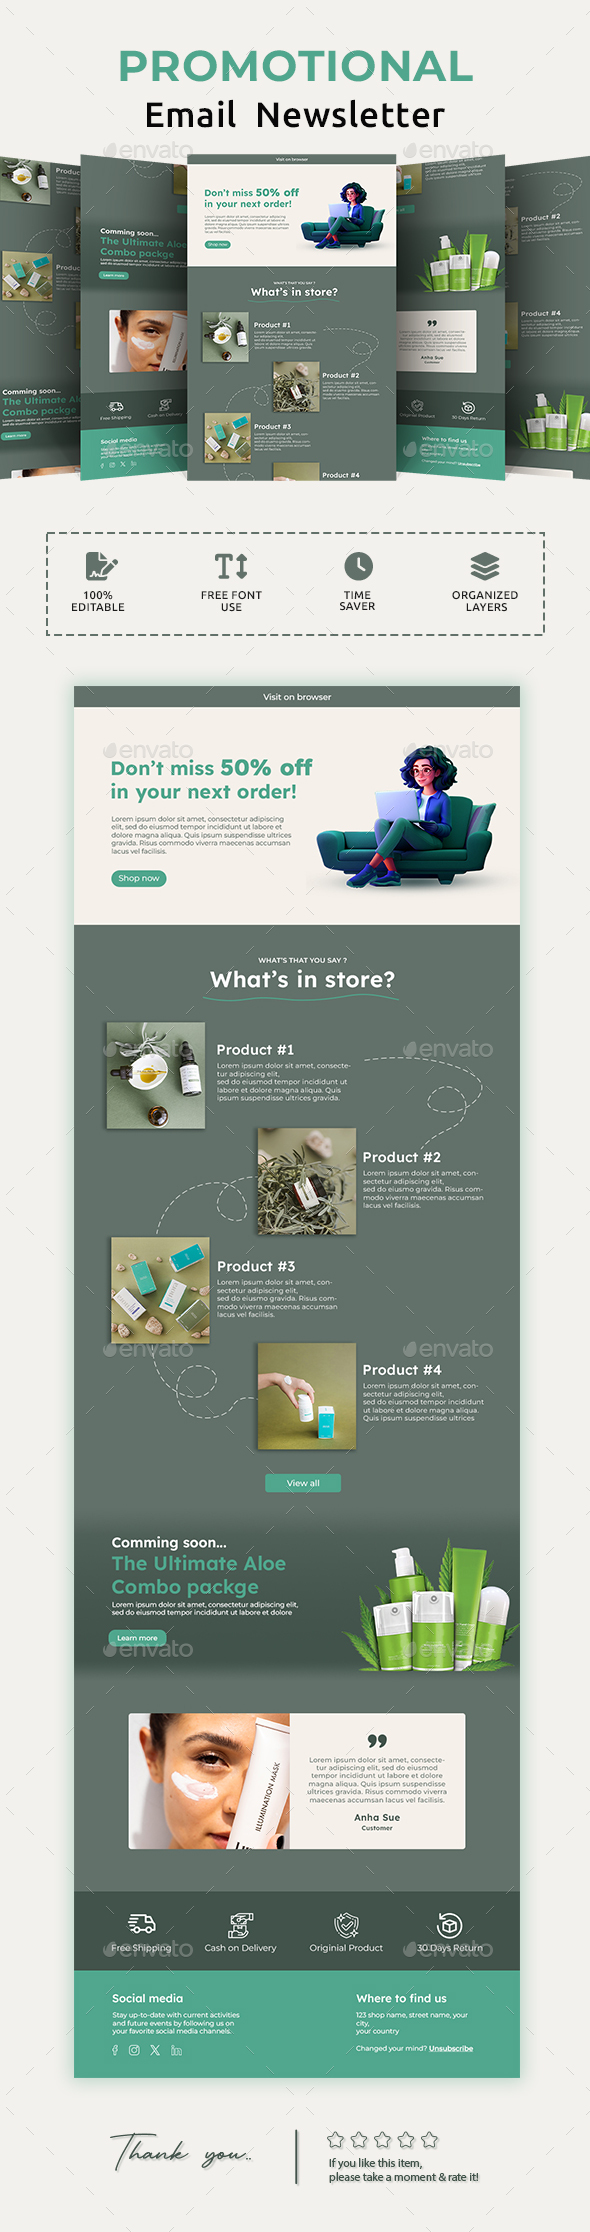 [DOWNLOAD]Beauty Products Email Newsletter PSD Template